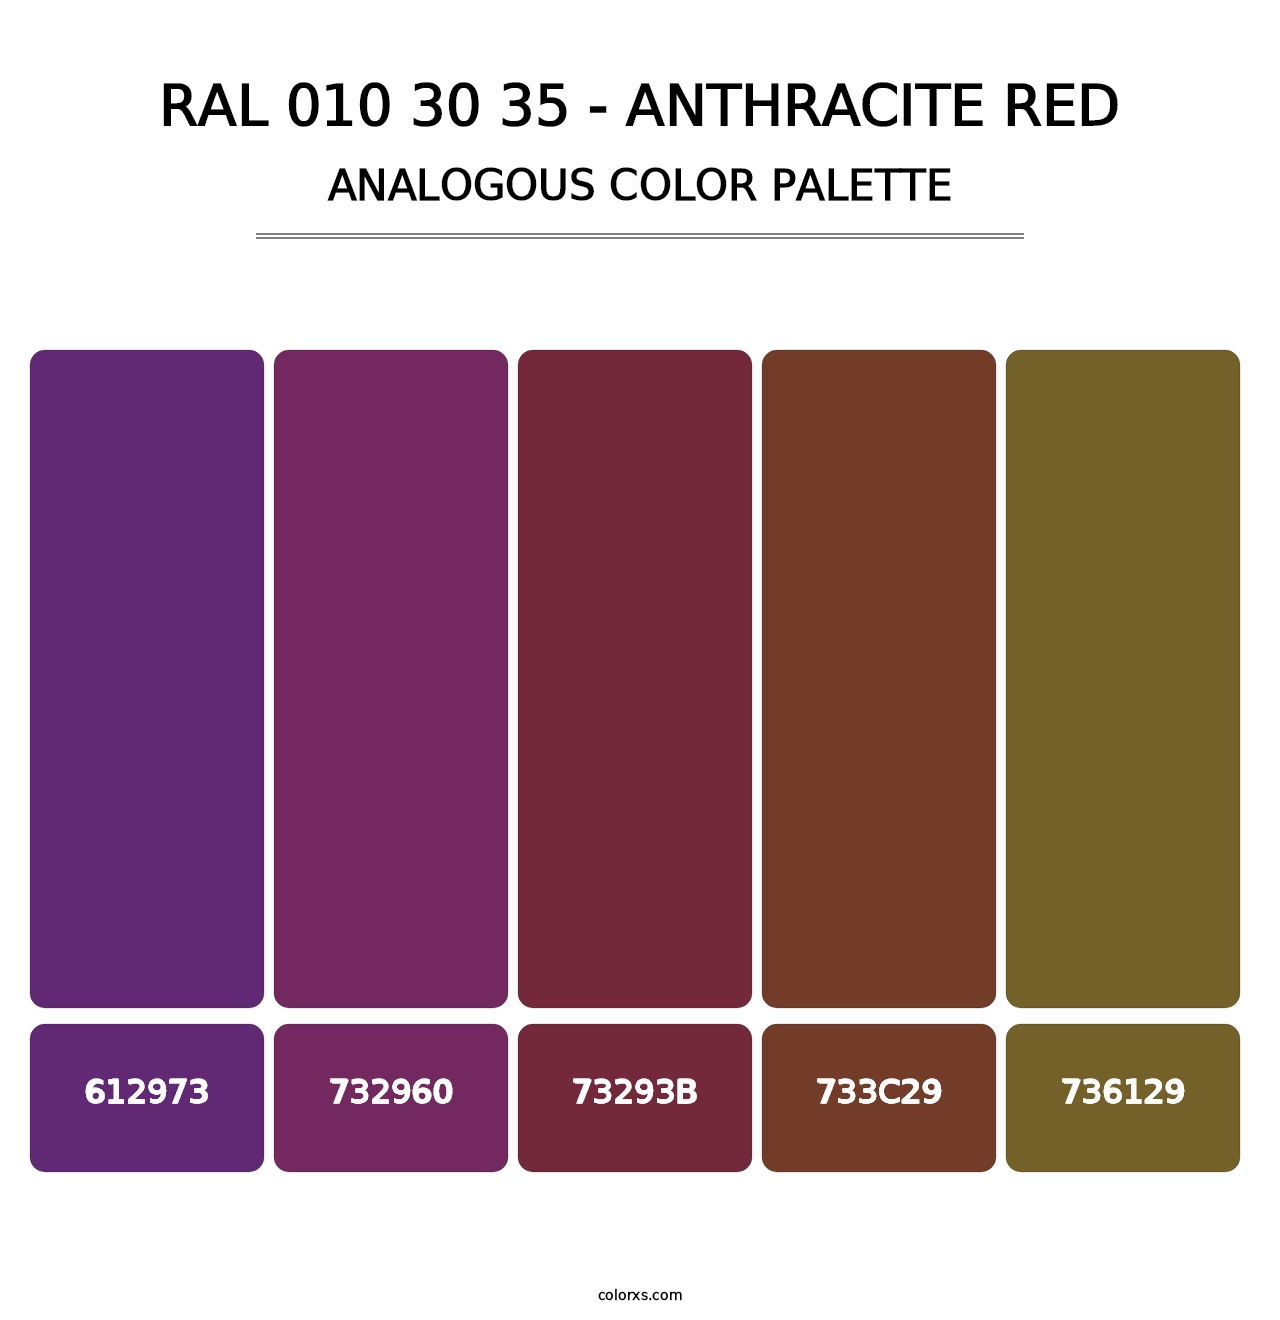 RAL 010 30 35 - Anthracite Red - Analogous Color Palette